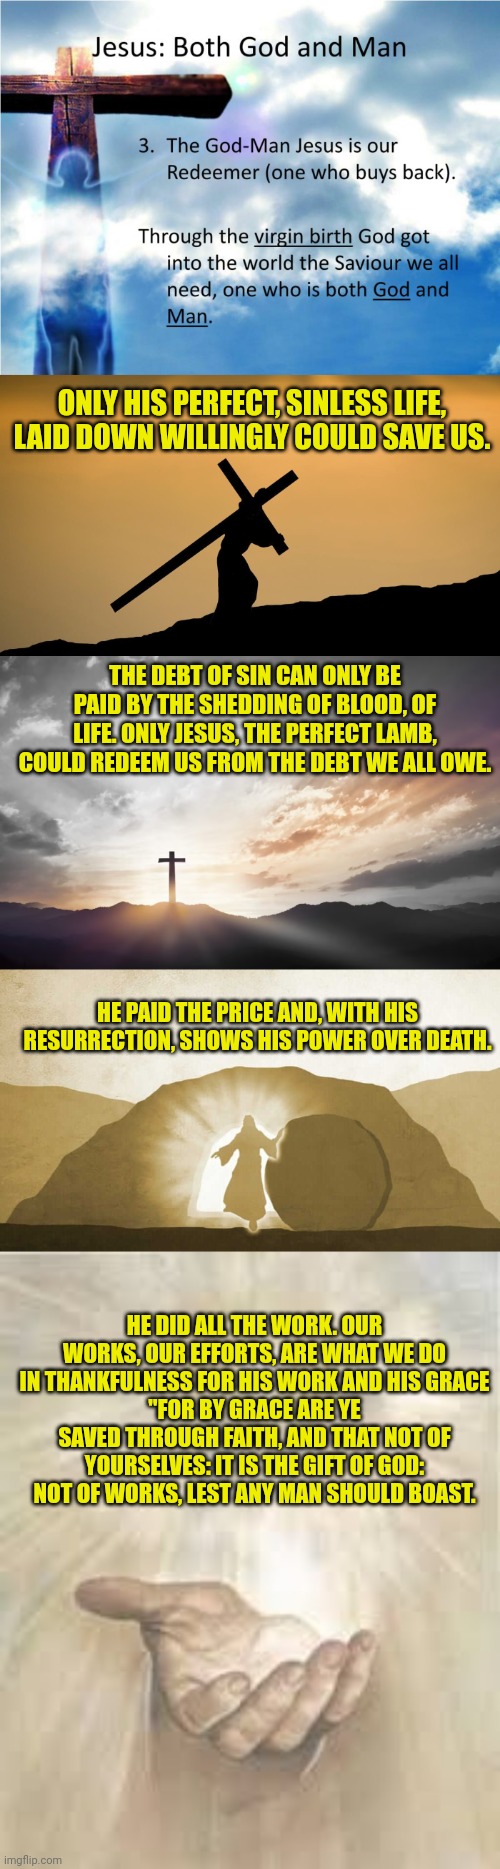 ONLY HIS PERFECT, SINLESS LIFE, LAID DOWN WILLINGLY COULD SAVE US. THE DEBT OF SIN CAN ONLY BE PAID BY THE SHEDDING OF BLOOD, OF LIFE. ONLY JESUS, THE PERFECT LAMB, COULD REDEEM US FROM THE DEBT WE ALL OWE. HE PAID THE PRICE AND, WITH HIS RESURRECTION, SHOWS HIS POWER OVER DEATH. HE DID ALL THE WORK. OUR WORKS, OUR EFFORTS, ARE WHAT WE DO IN THANKFULNESS FOR HIS WORK AND HIS GRACE
"FOR BY GRACE ARE YE SAVED THROUGH FAITH, AND THAT NOT OF YOURSELVES: IT IS THE GIFT OF GOD: NOT OF WORKS, LEST ANY MAN SHOULD BOAST. | image tagged in jesus both god and man,jesus crossfit,son of god son of man,jesus exiting tomb,jesus beckoning | made w/ Imgflip meme maker